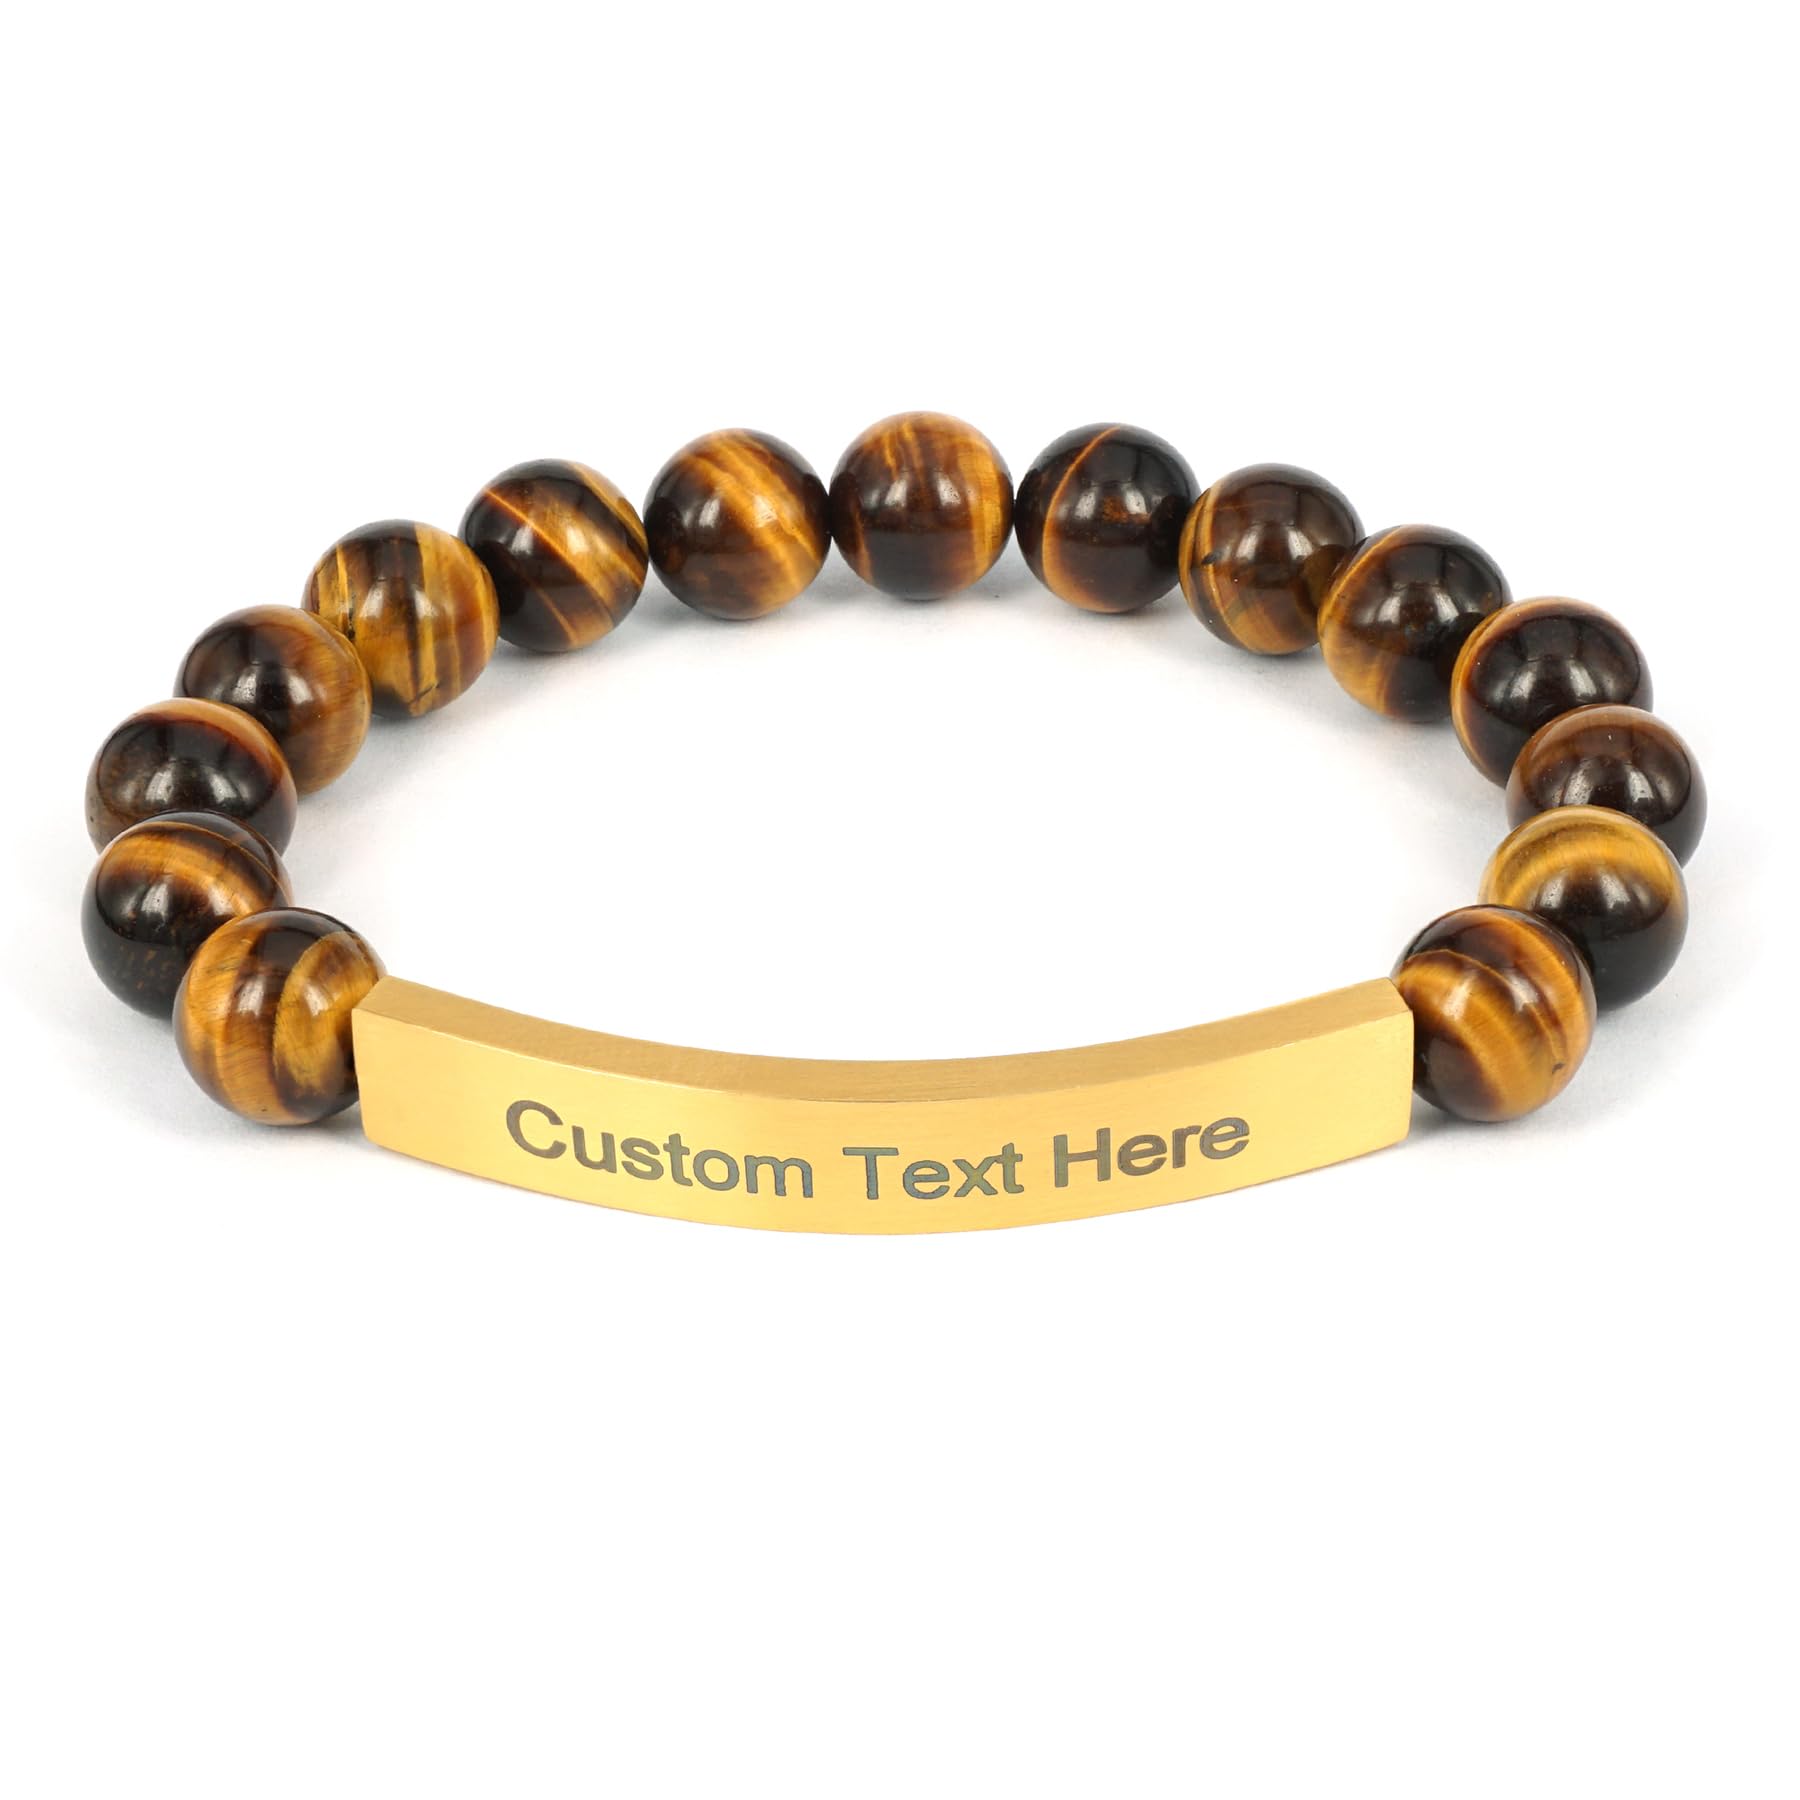 cusurlove Personalized Bracelets for Women Men Couple,18K Gold Plated Stainless Steel Bar Custom Engraved Name Message Quotes Natural Gemstone Beaded Stretch Bracelet